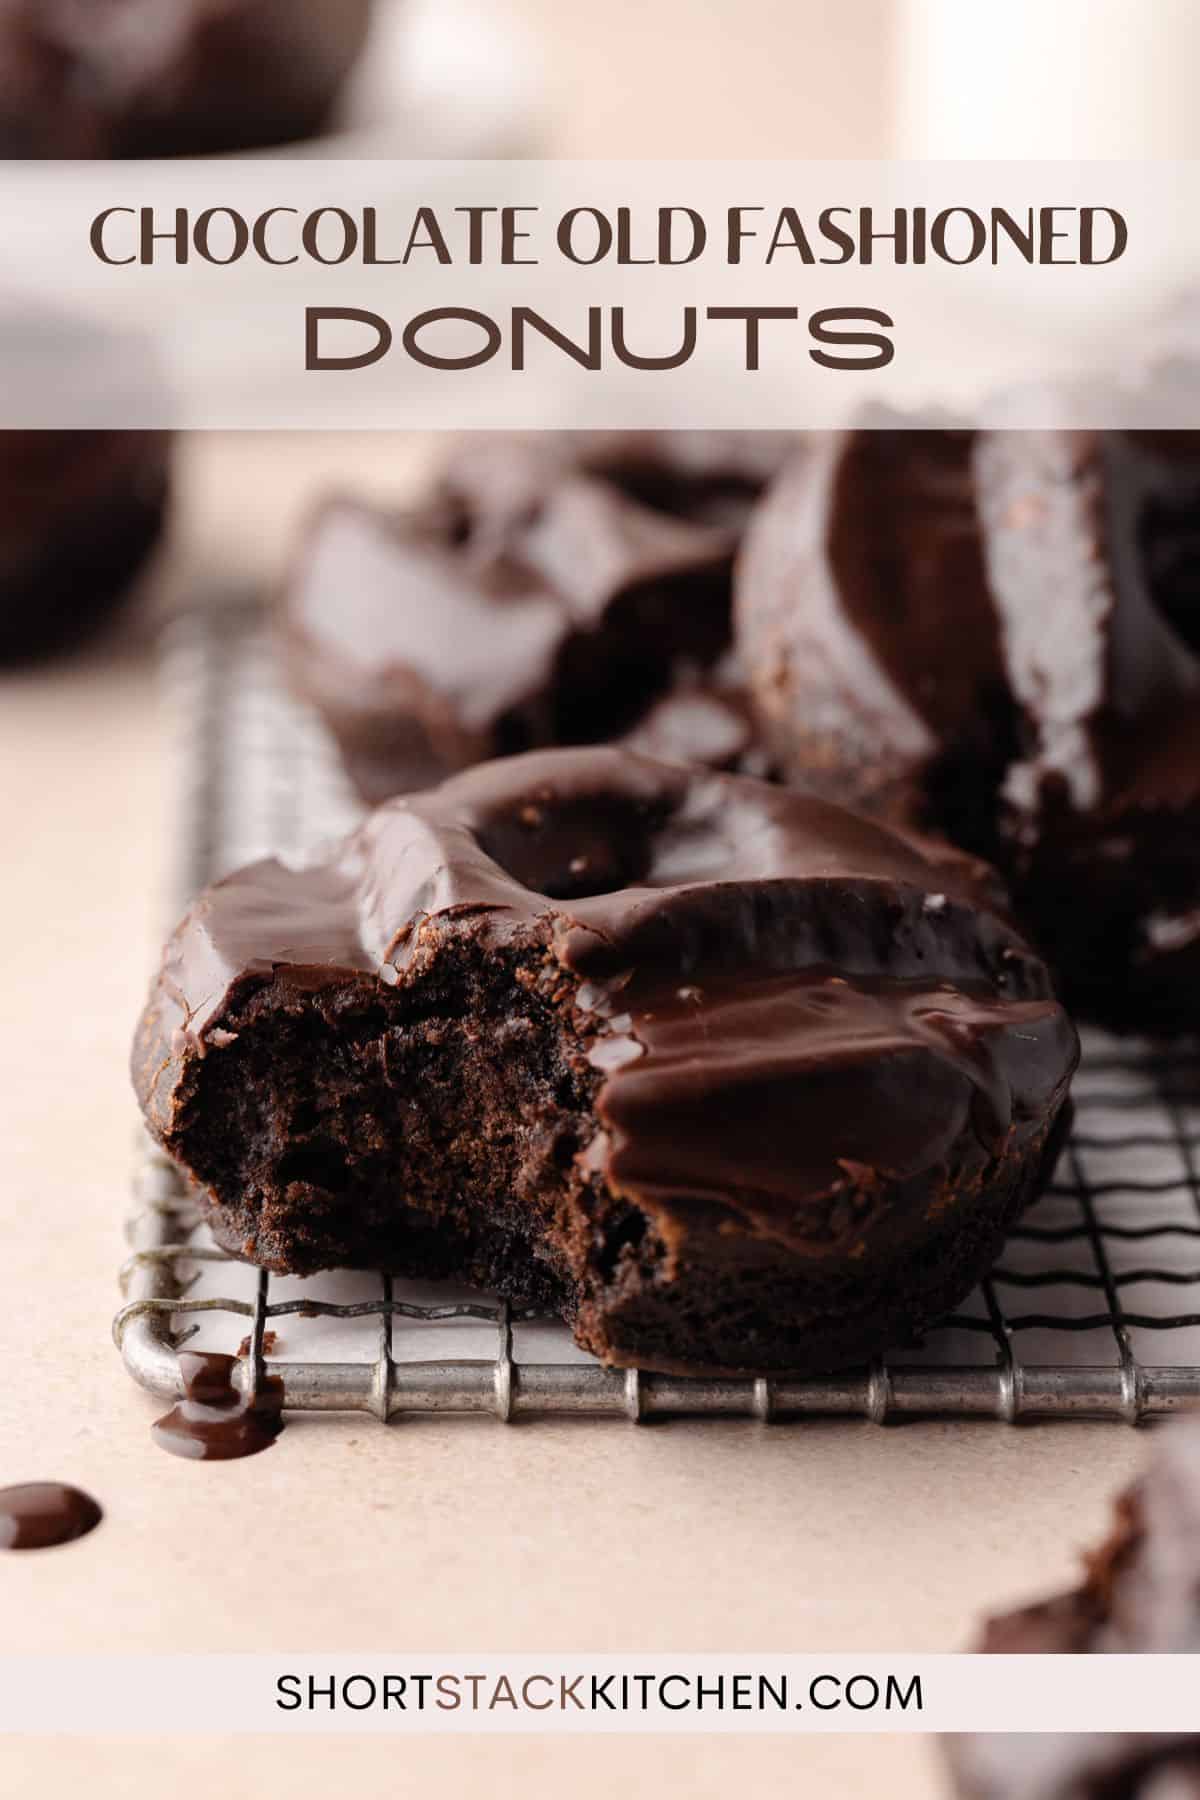 Chocolate Old-Fashioned Donuts photo for pinterest.